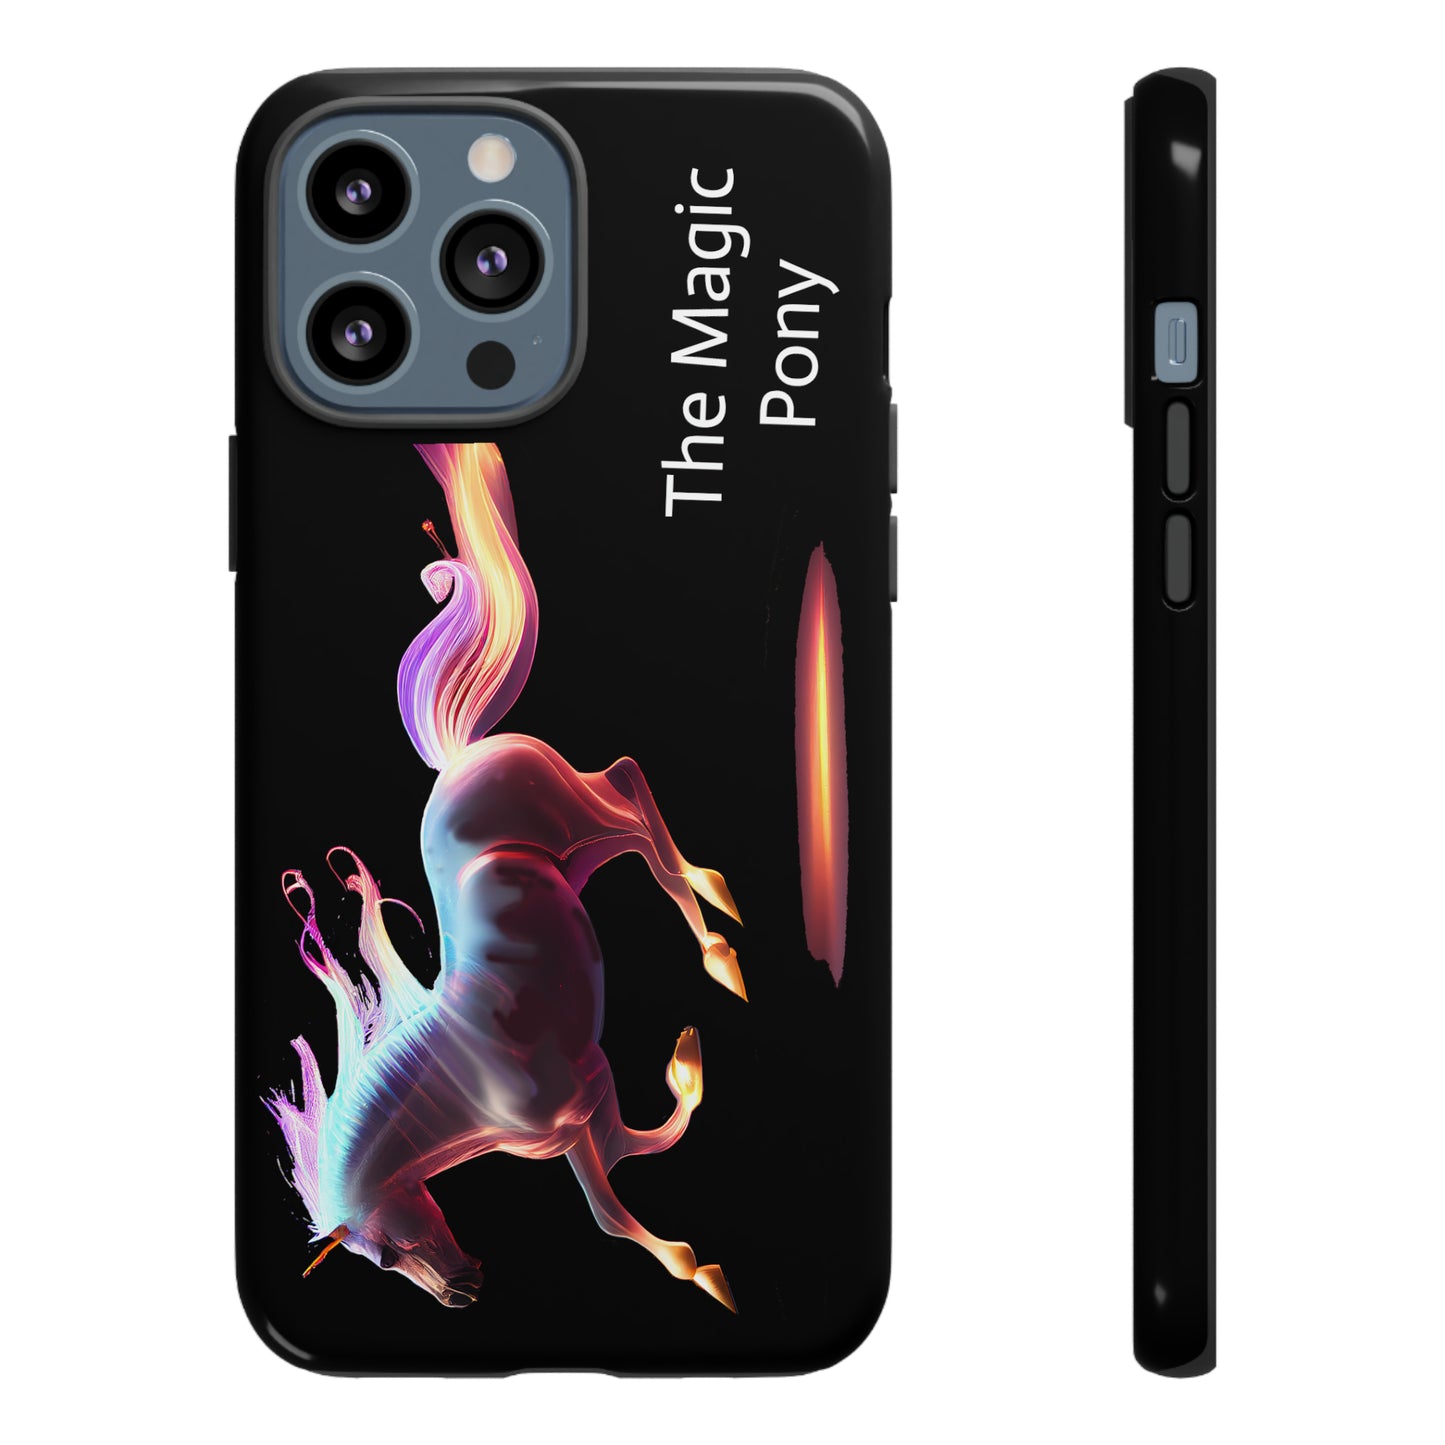 "The Magic Pony" Phone Case - Protect Your Tech with Magic: